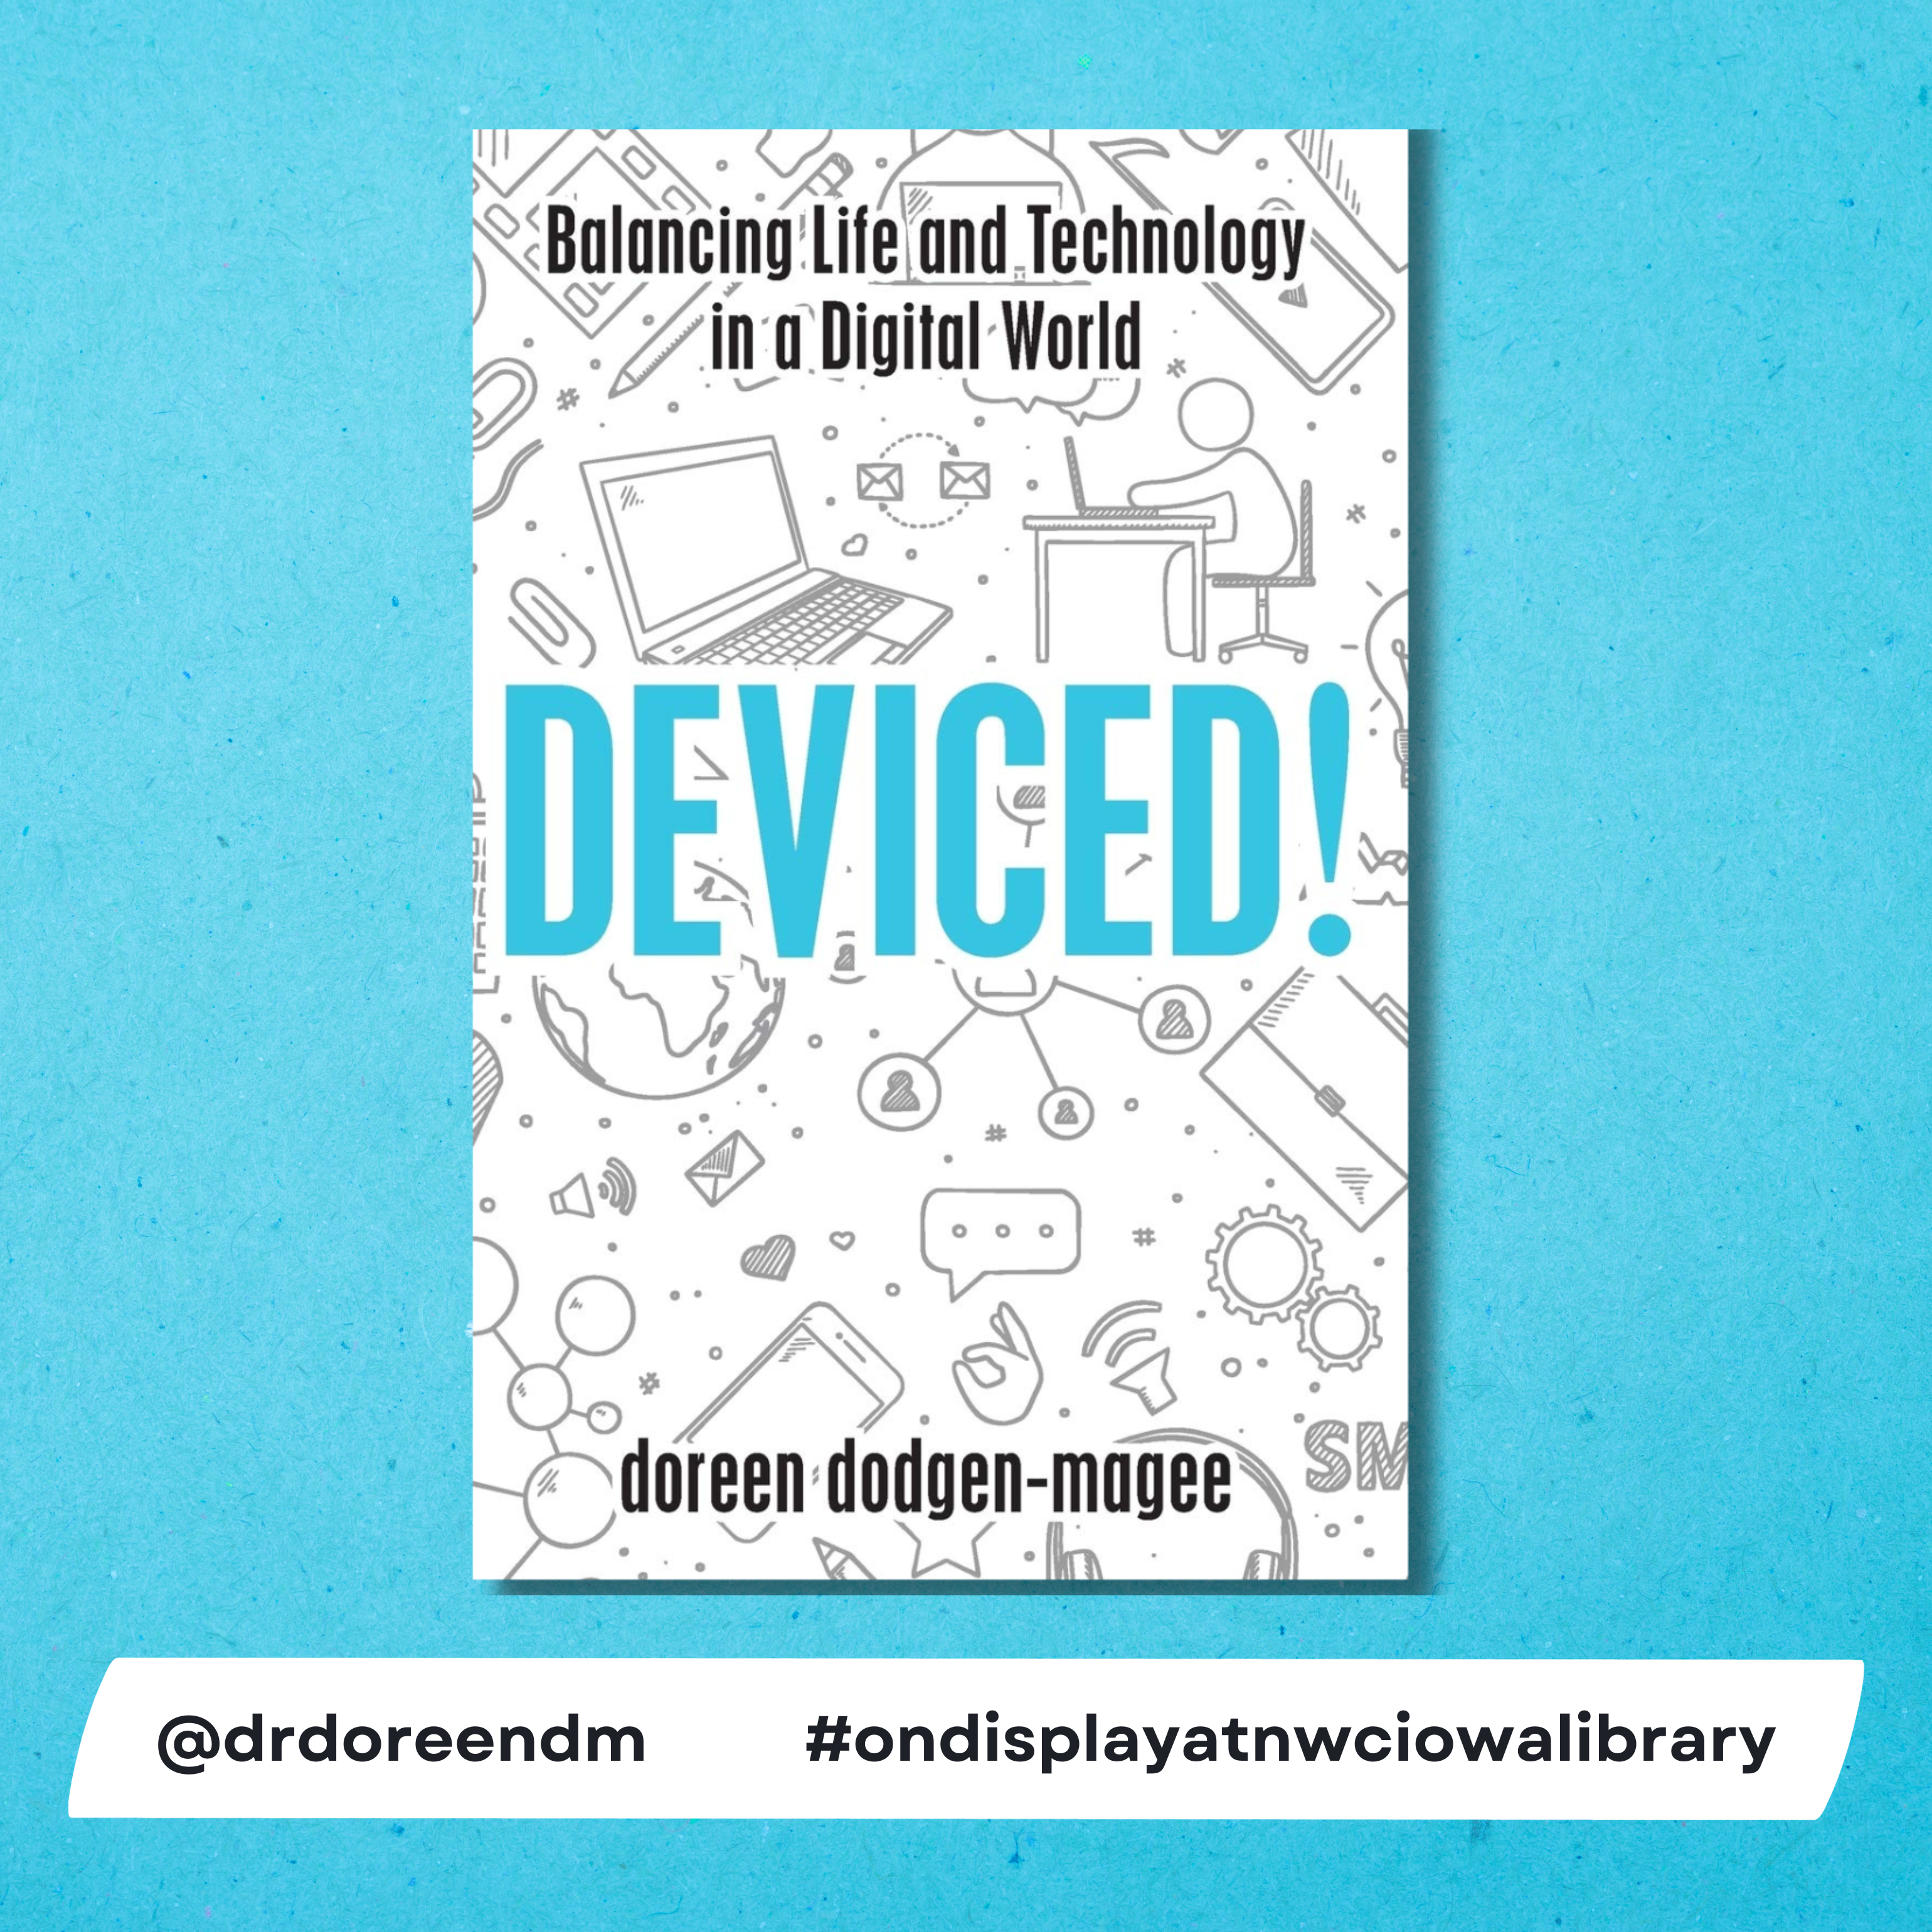 Now on Display: Deviced!: Balancing Life and Technology in a Digital World by Dr. Doreen Dodgen-Magee. Stop by the Library Desk to view and borrow this book.  #ondisplayatnwciowalibrary